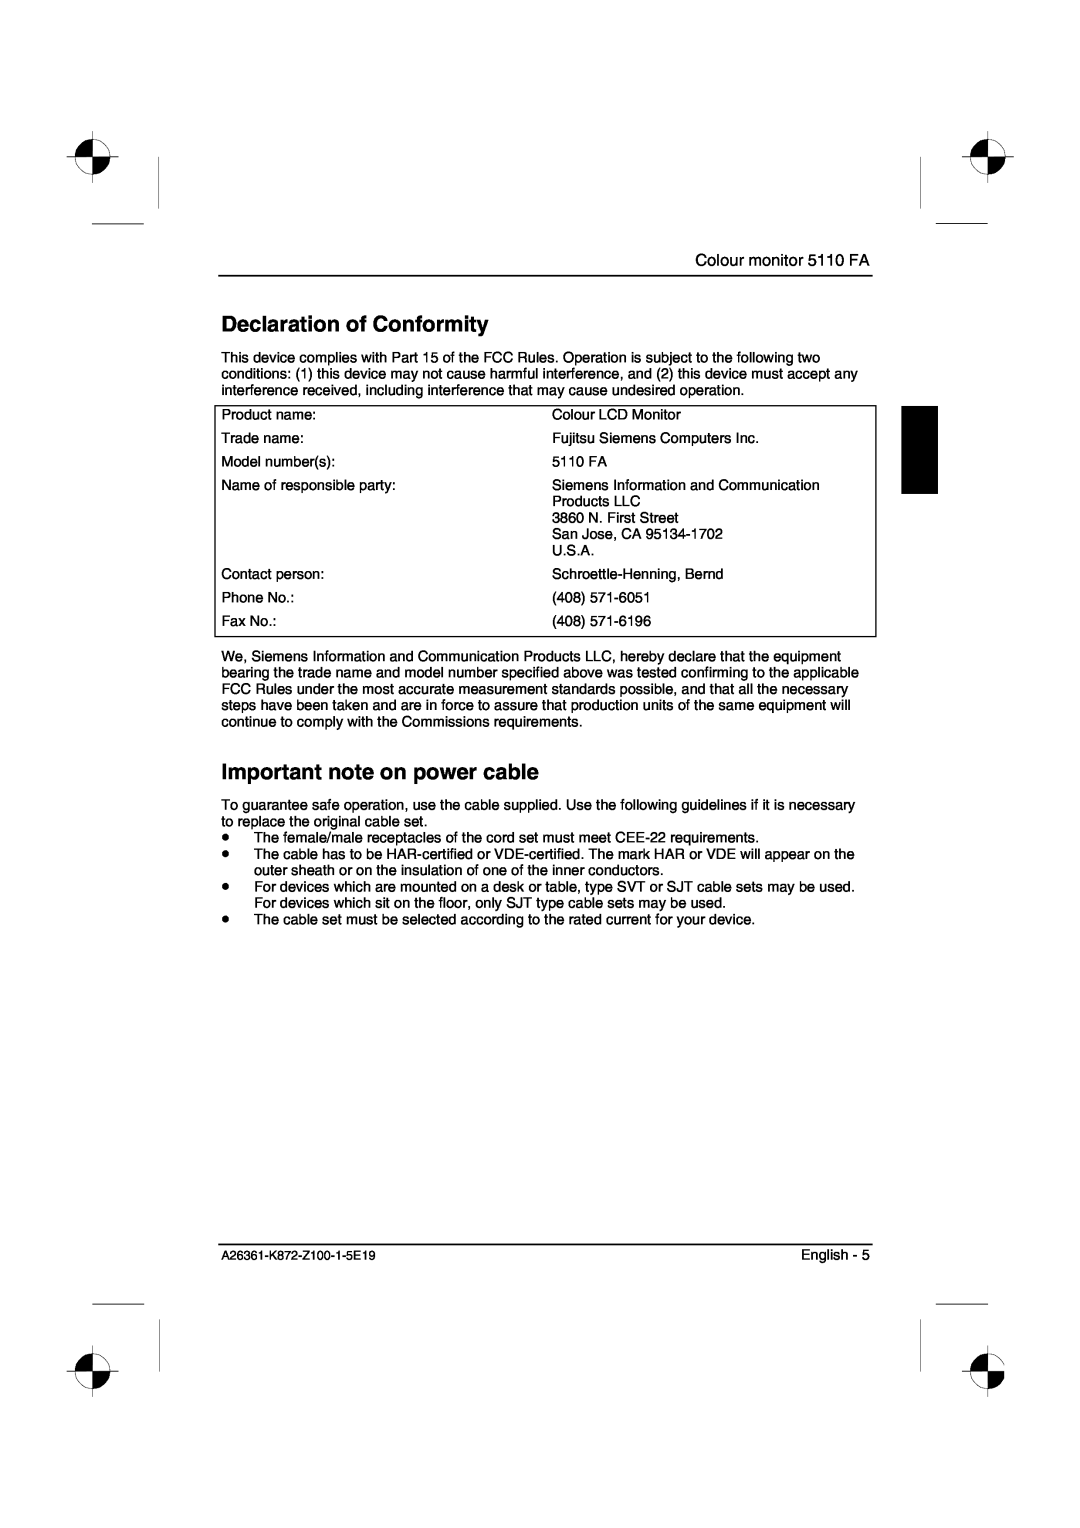 Fujitsu Siemens Computers manual Declaration of Conformity, Important note on power cable, Colour monitor 5110 FA 